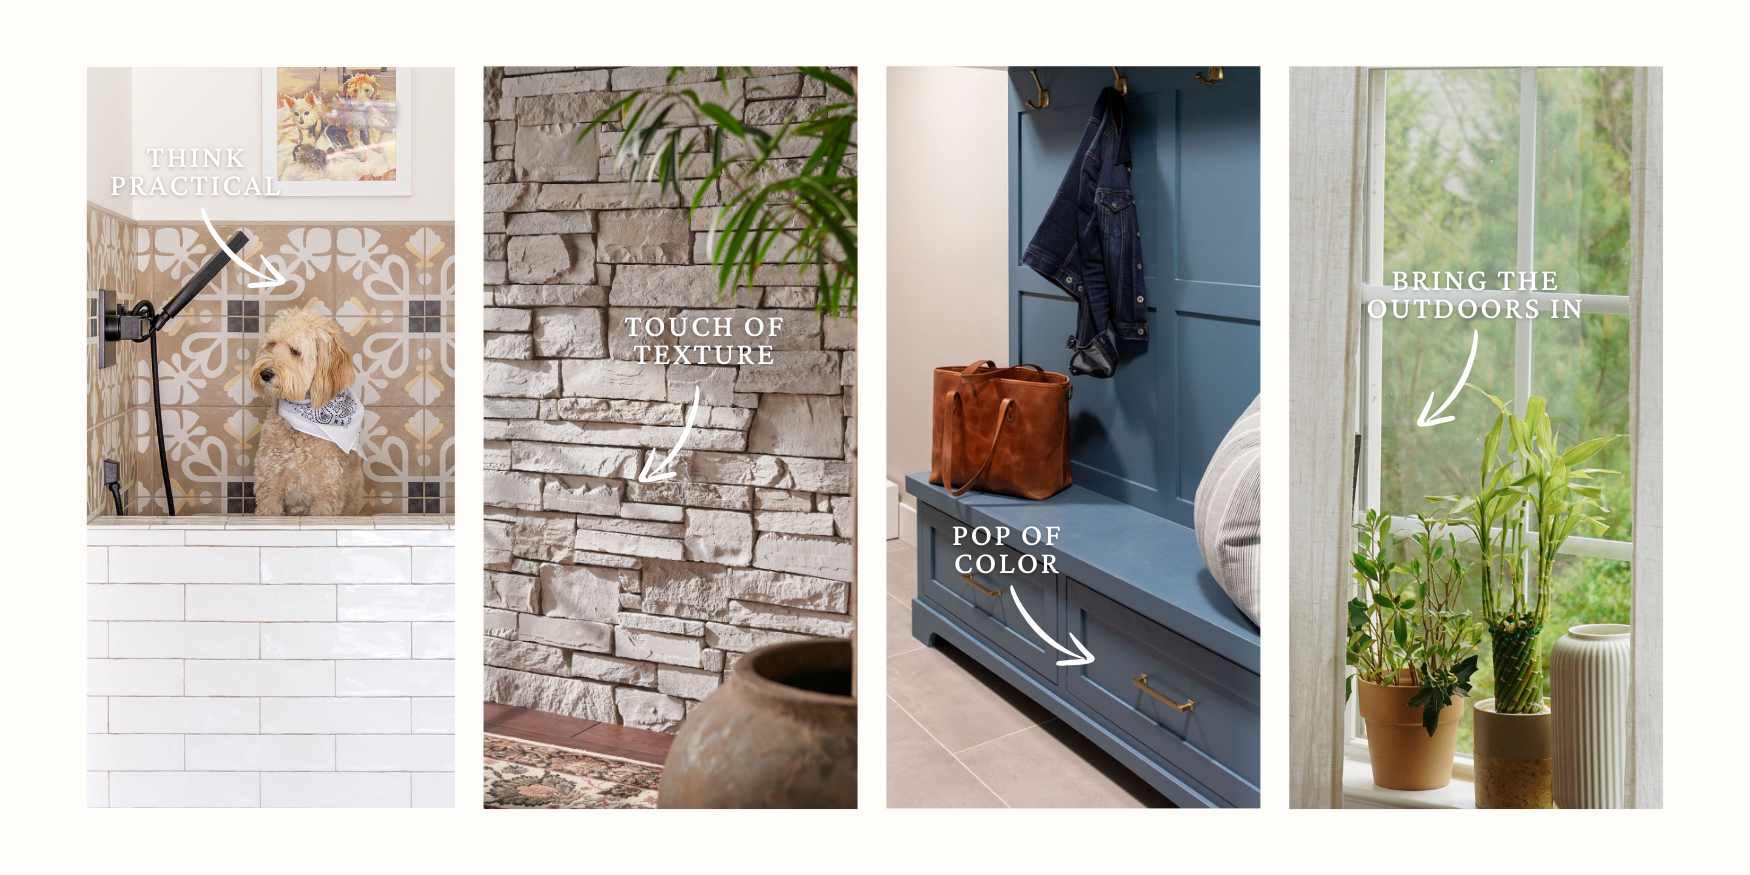 Make it yours by adding personal touches to your functional mudroom, showcasing a dog in a bandana sitting in a tiled shower area beside a textured stone wall and practical wooden bench